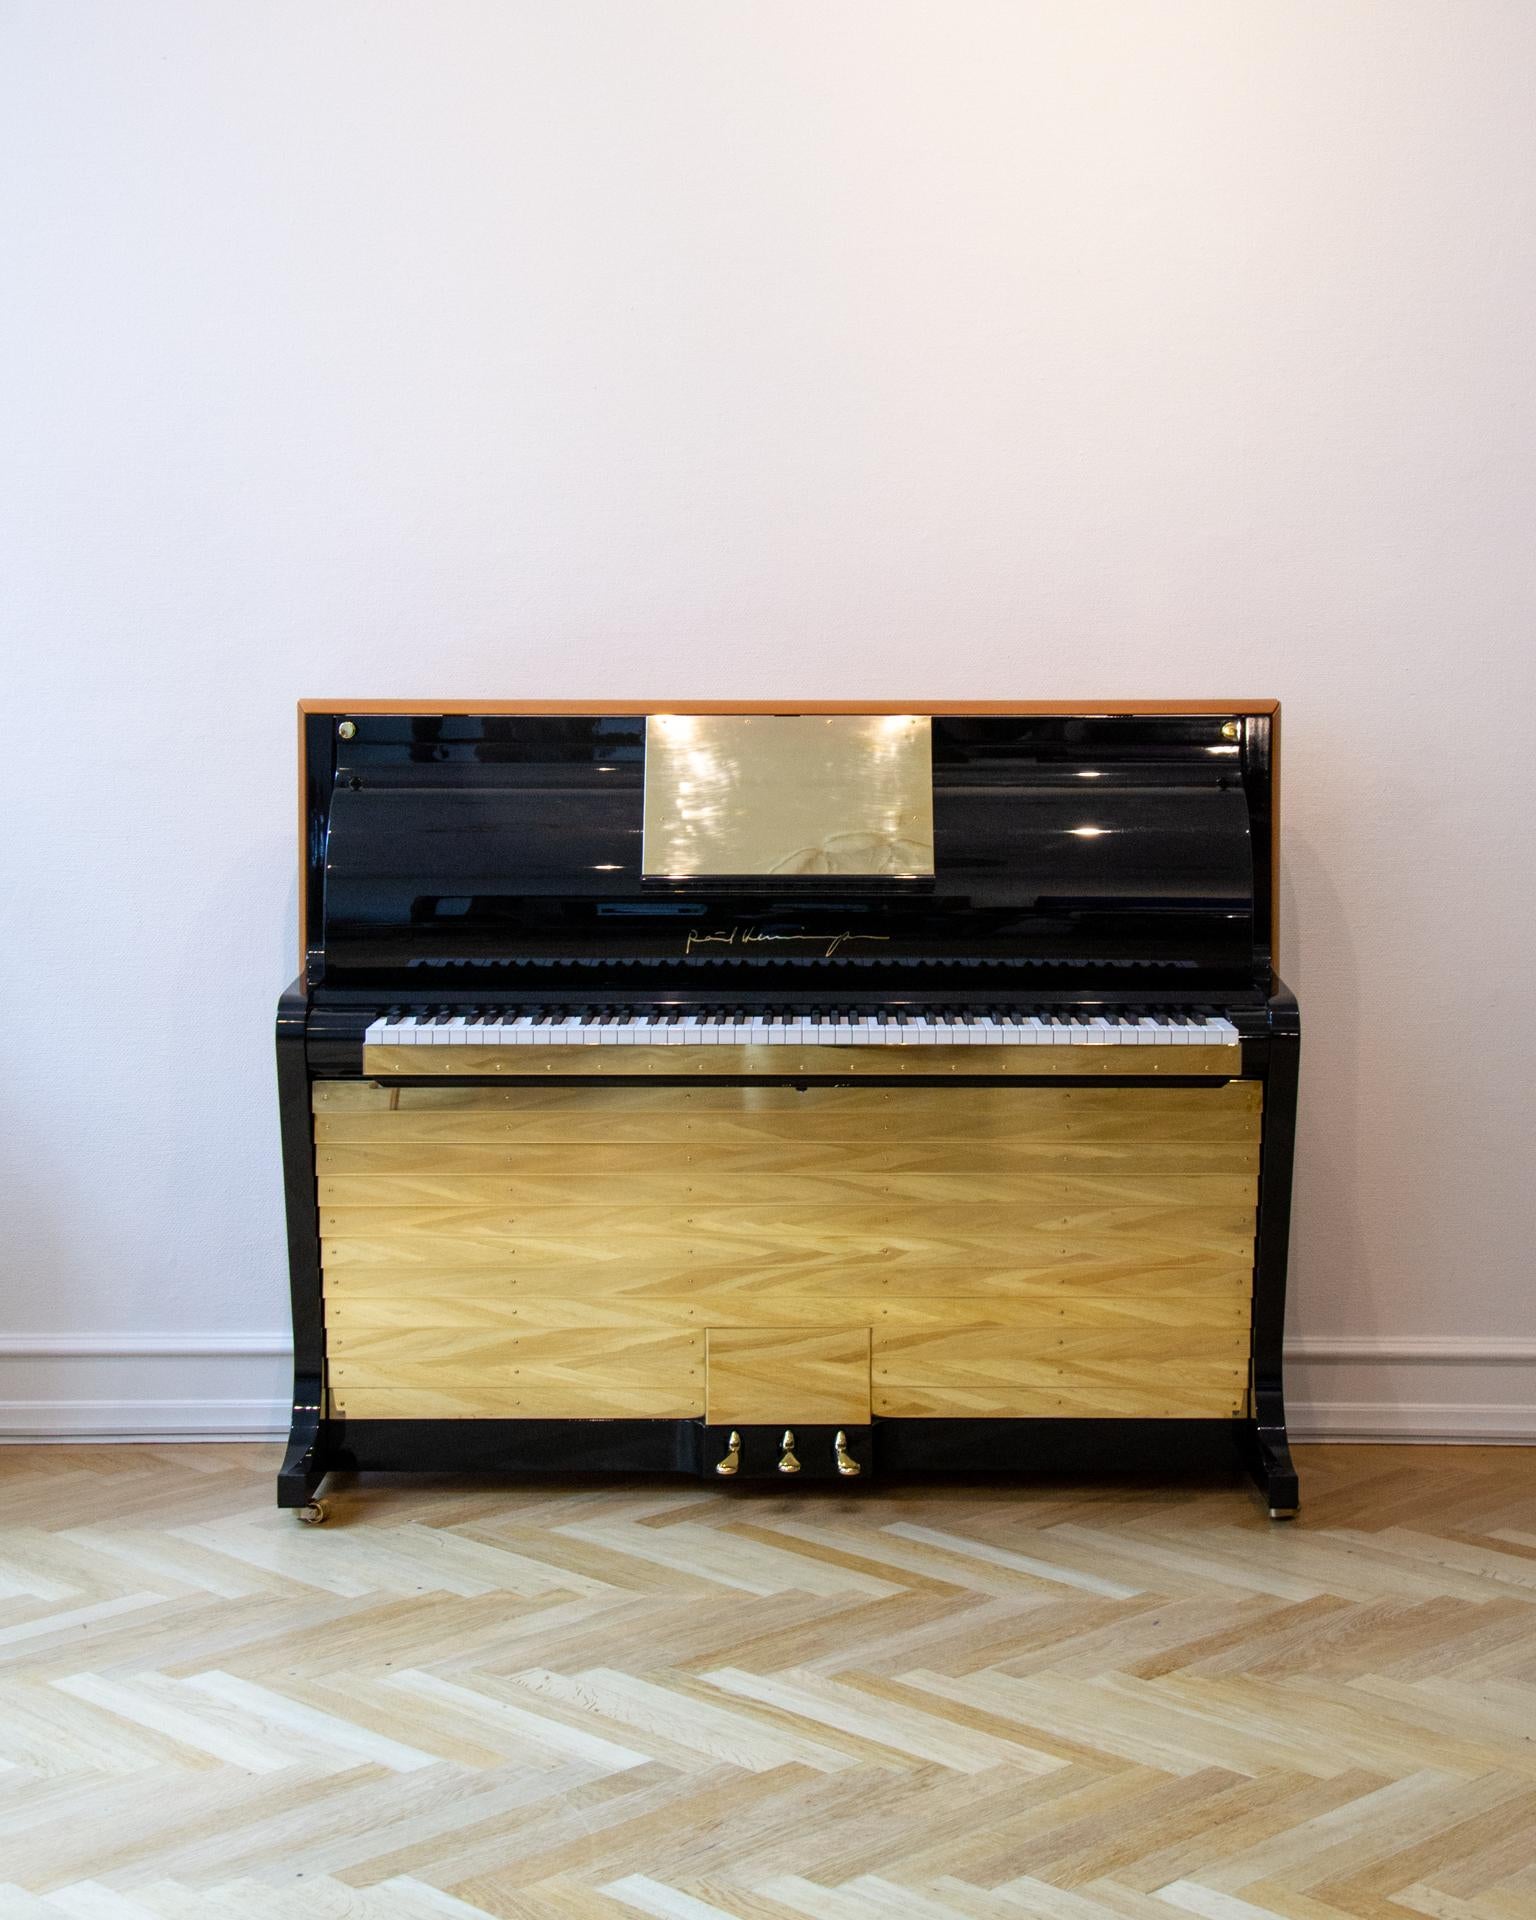 - All prices are listed ex works.
- 5 year guarantee.
- We regularly crate, ship, and install PH Pianos worldwide with full insurance.

An incredible design piece for all spaces. This new edition of the PH Upright Piano embodies the design